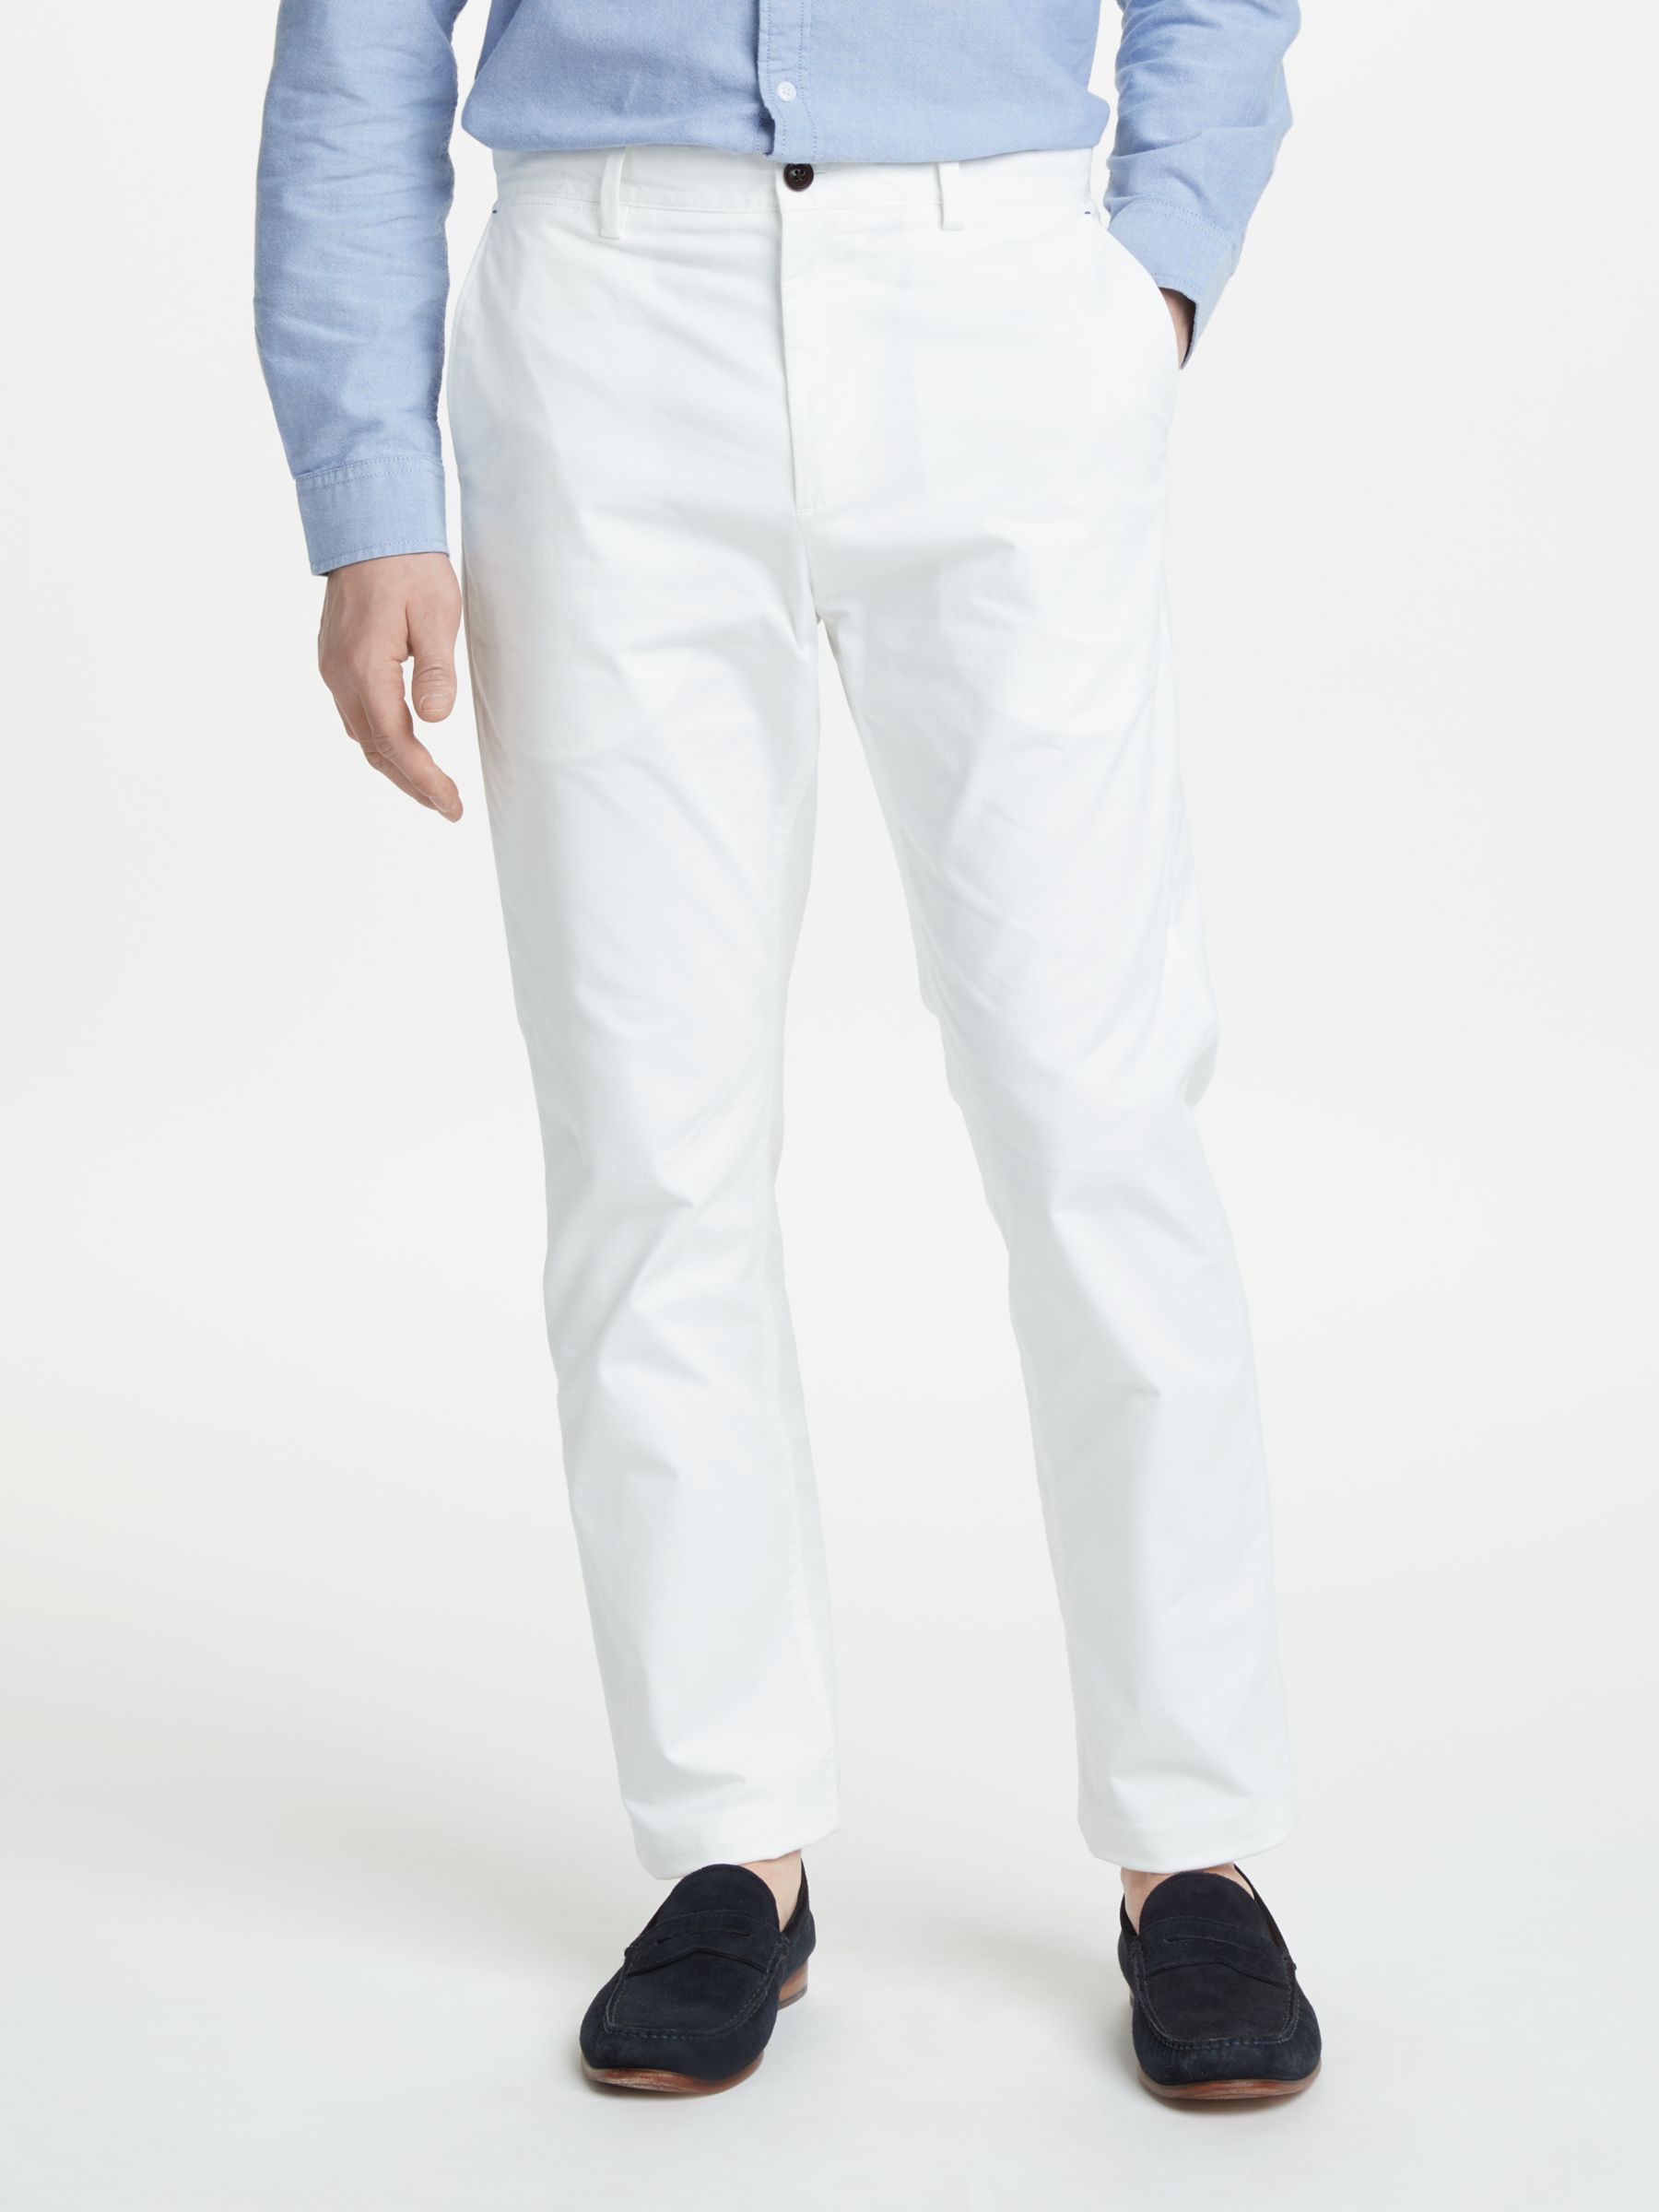 John Lewis & Partners Essential Chinos, White, 36S